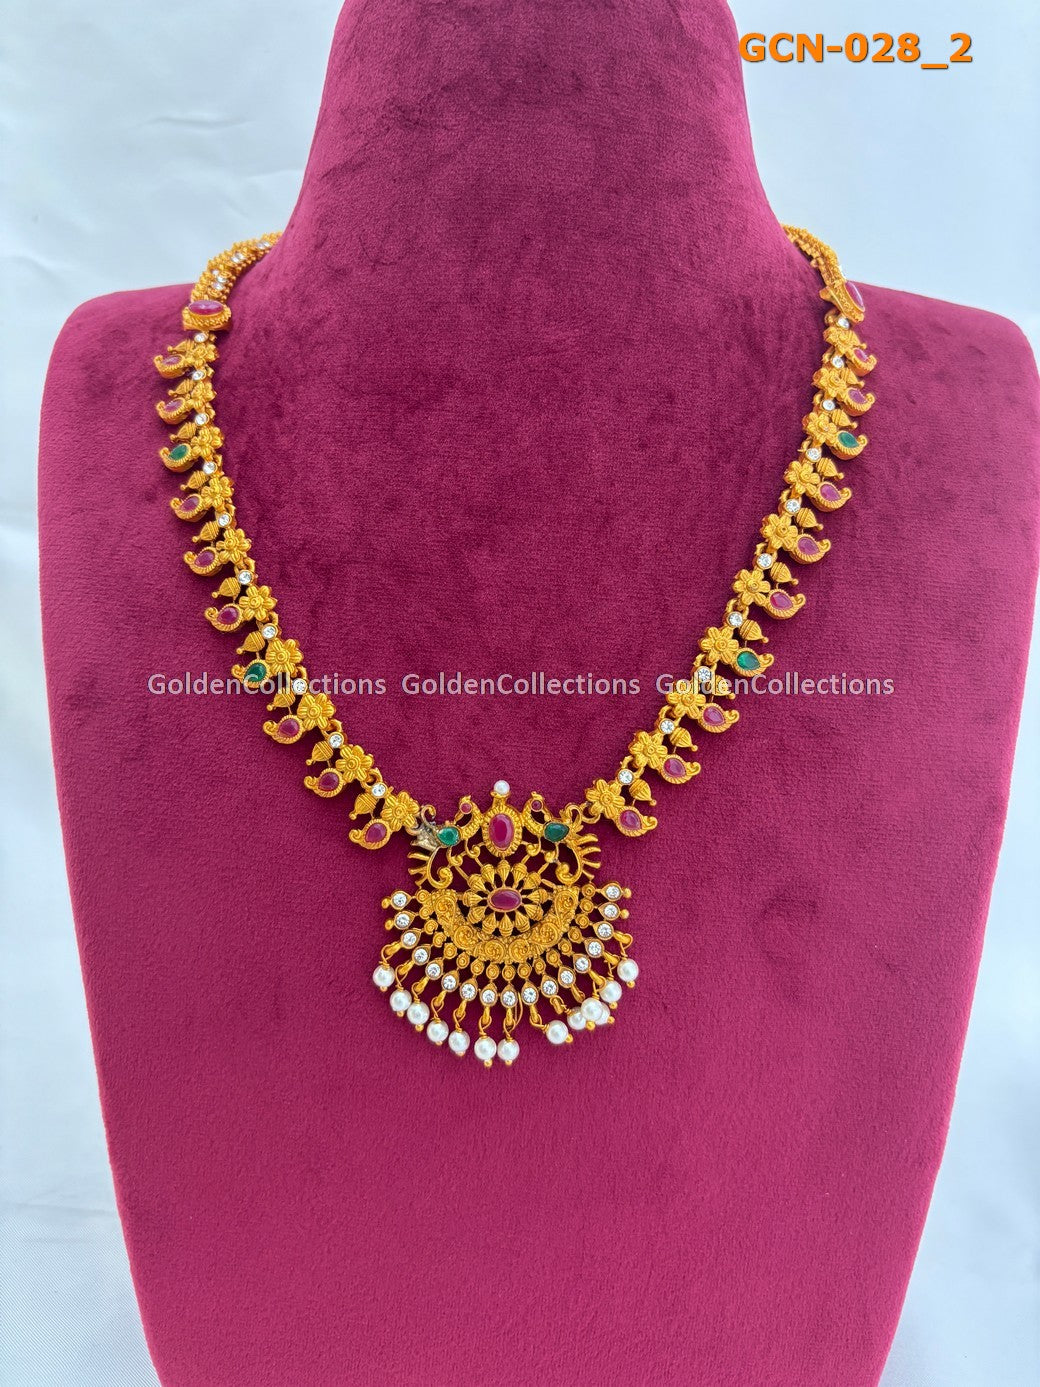 Necklaces For Women : Antique Costume Necklace Golden Collections 3